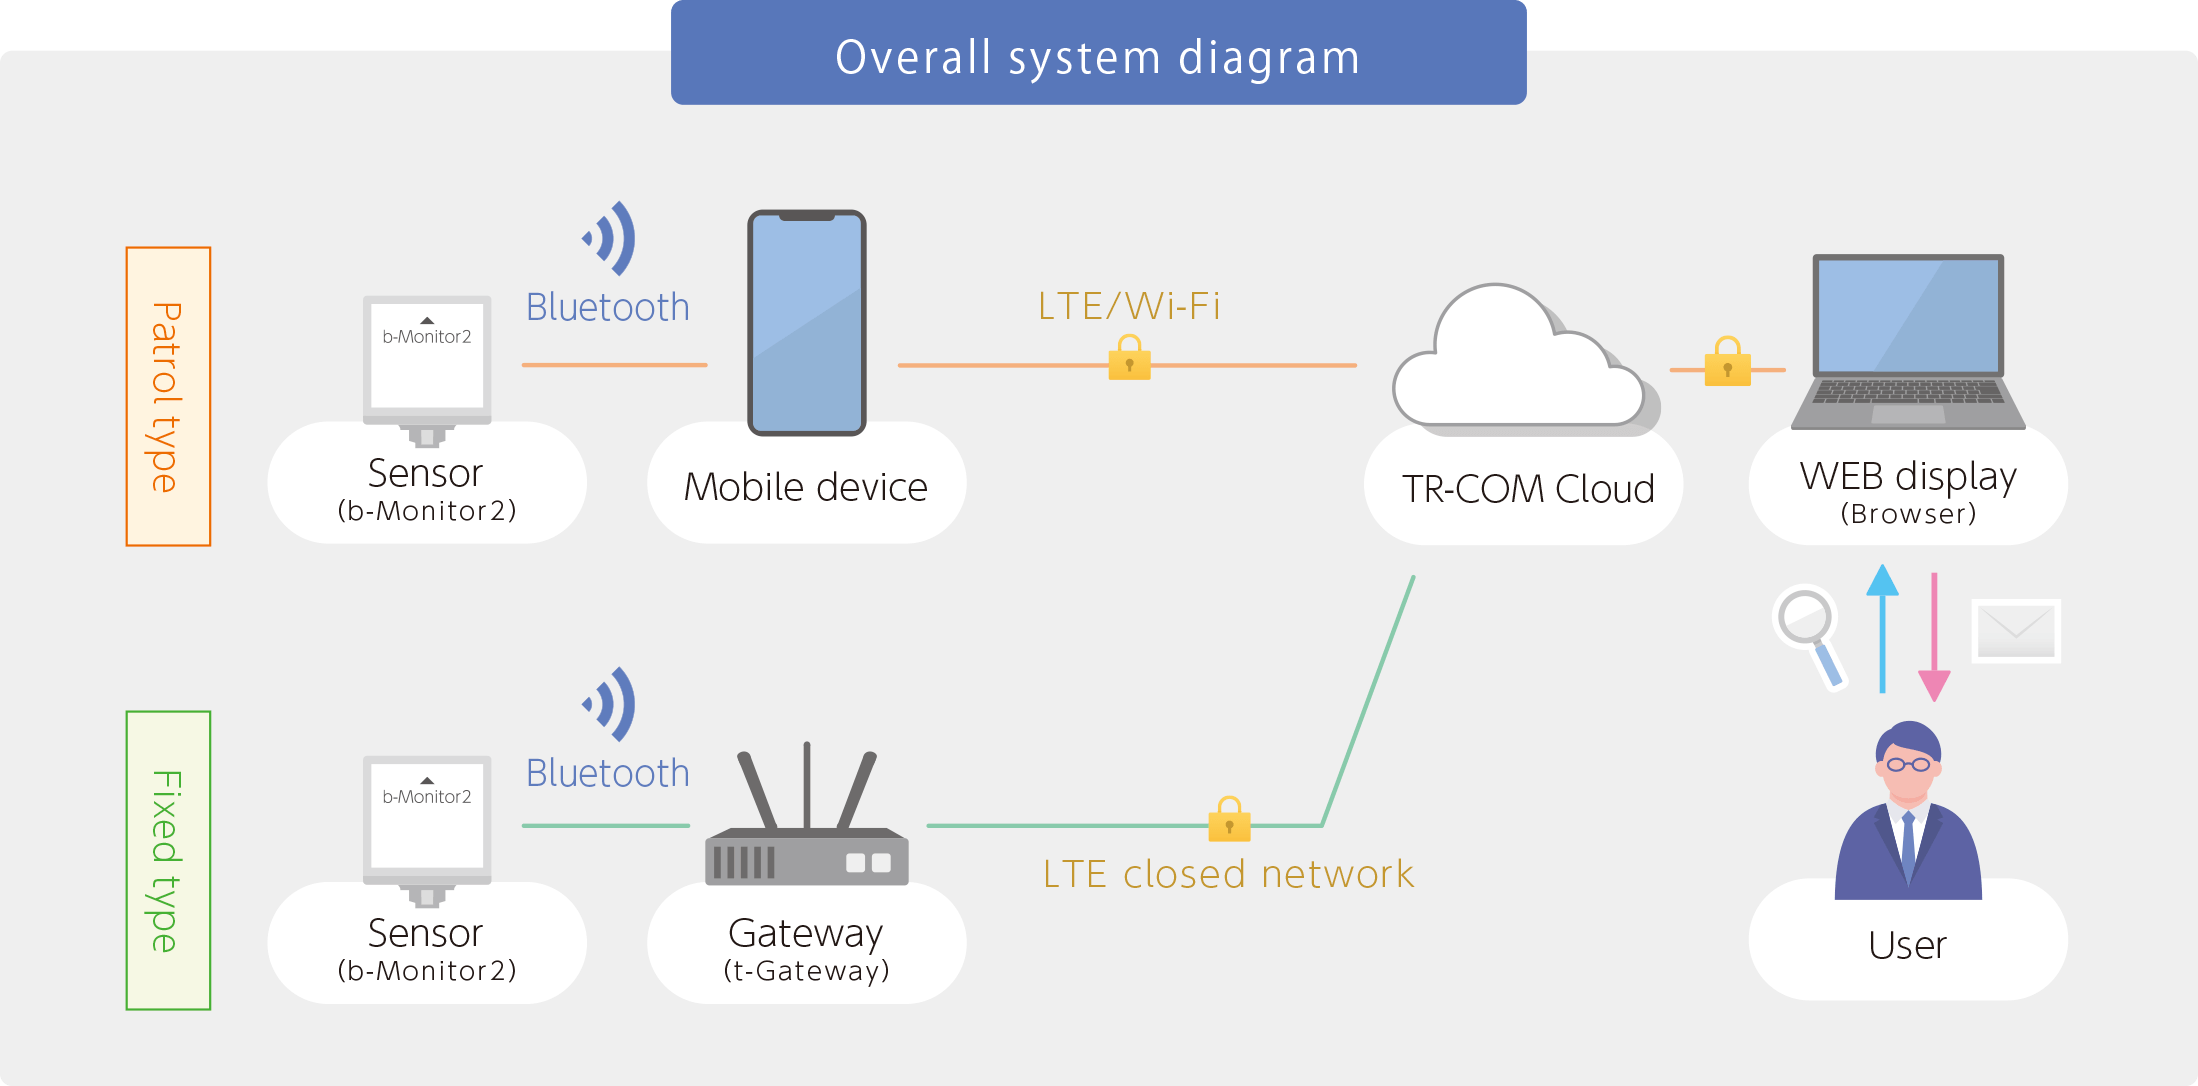 Overall system diagram